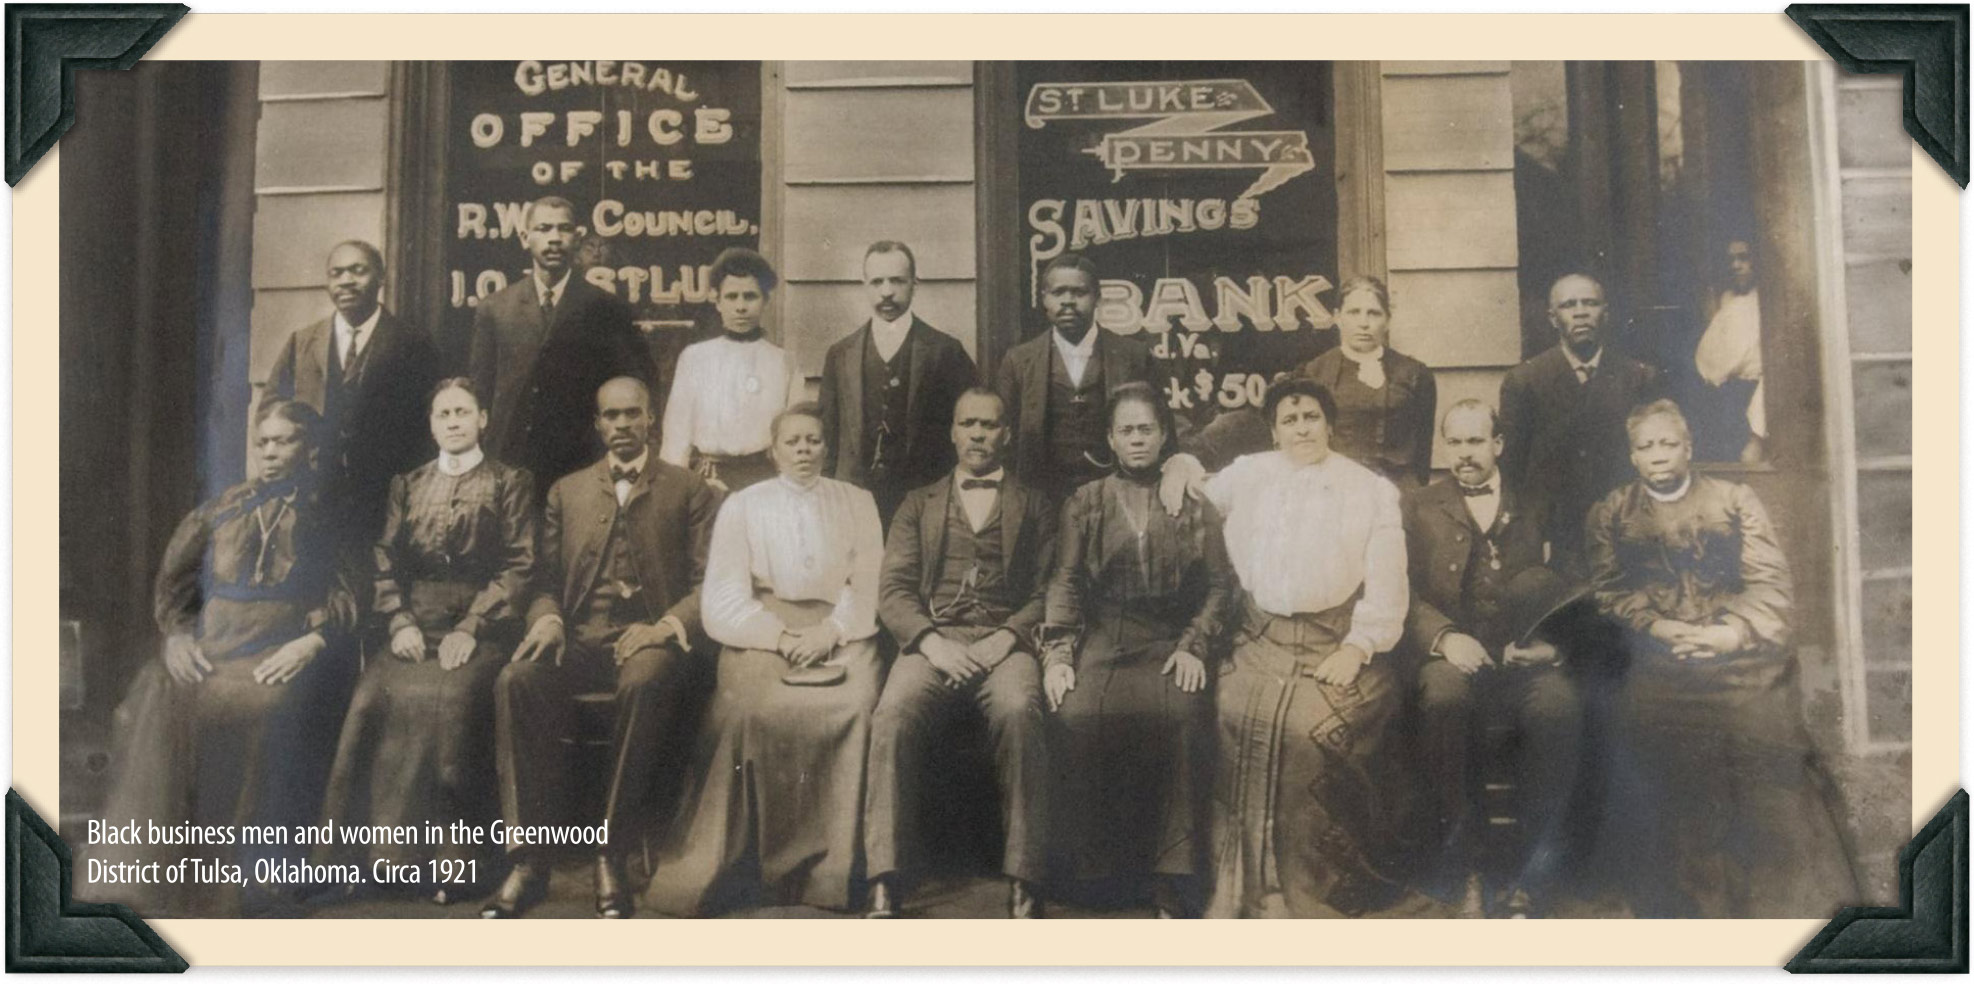 Black business men and women in the Greenwood District of Tulsa, Oklahoma. Circa 1921